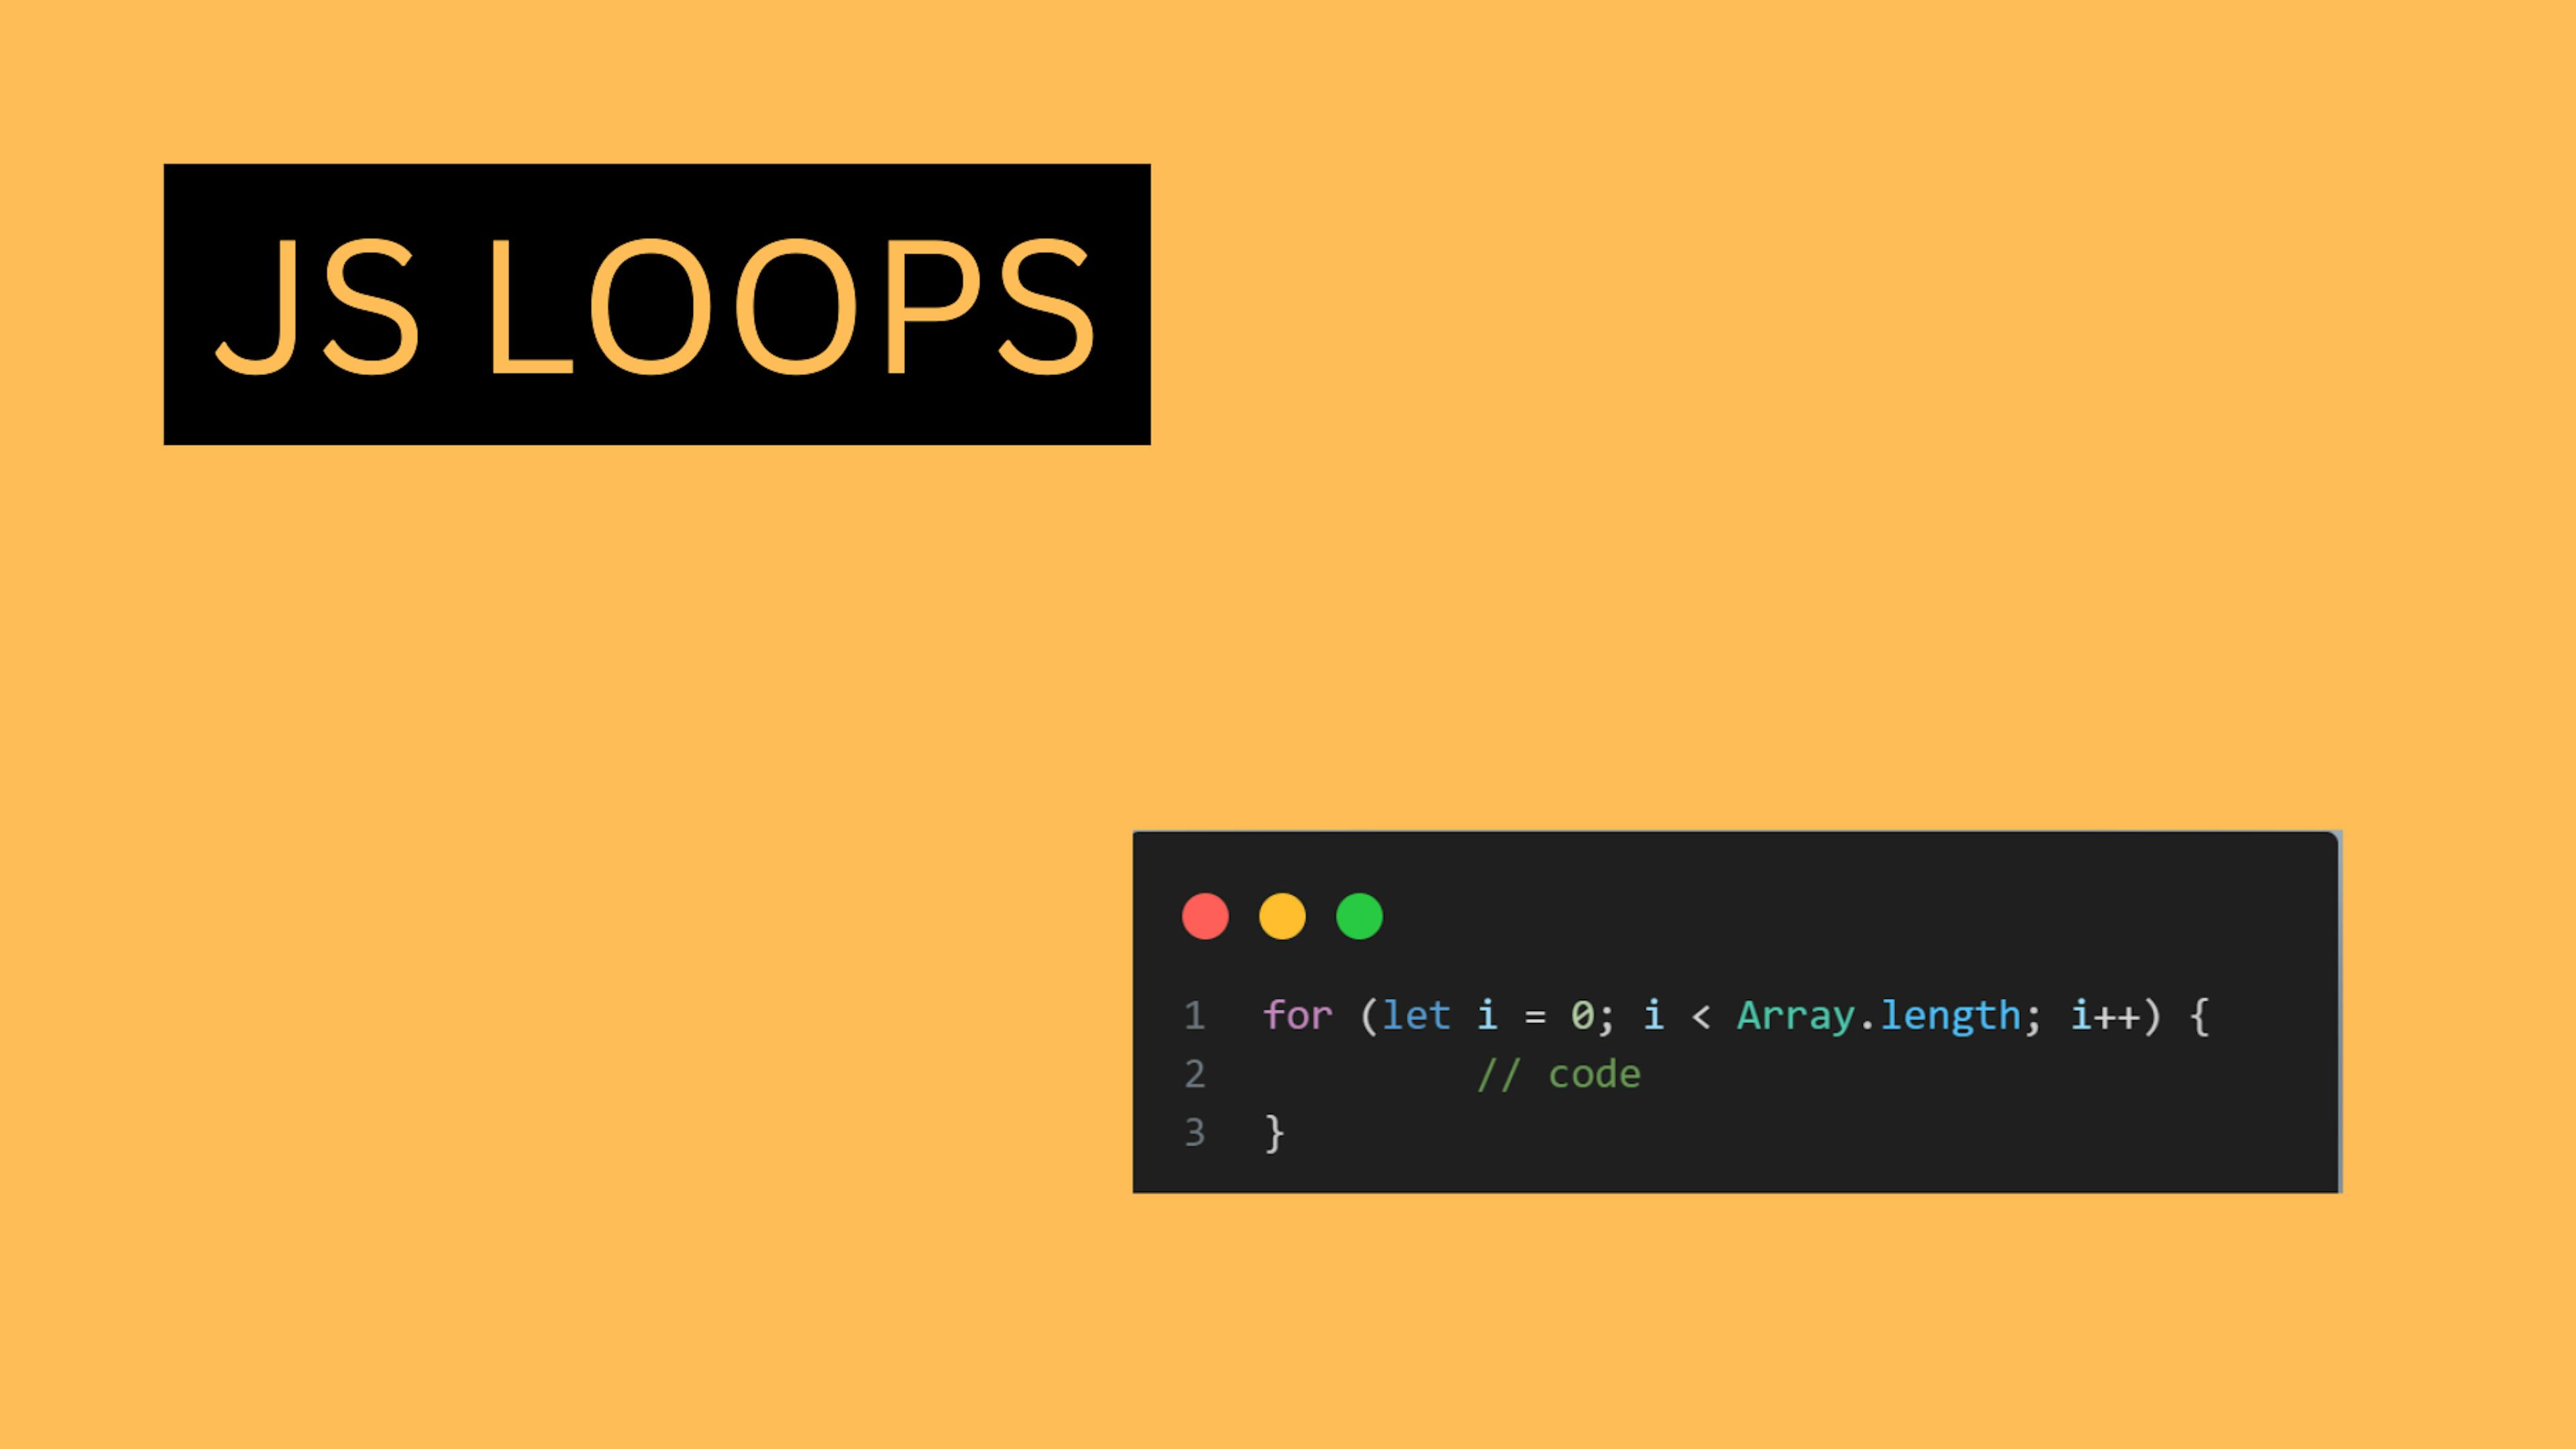 /javascript-loops-for-beginners-learn-the-basics feature image